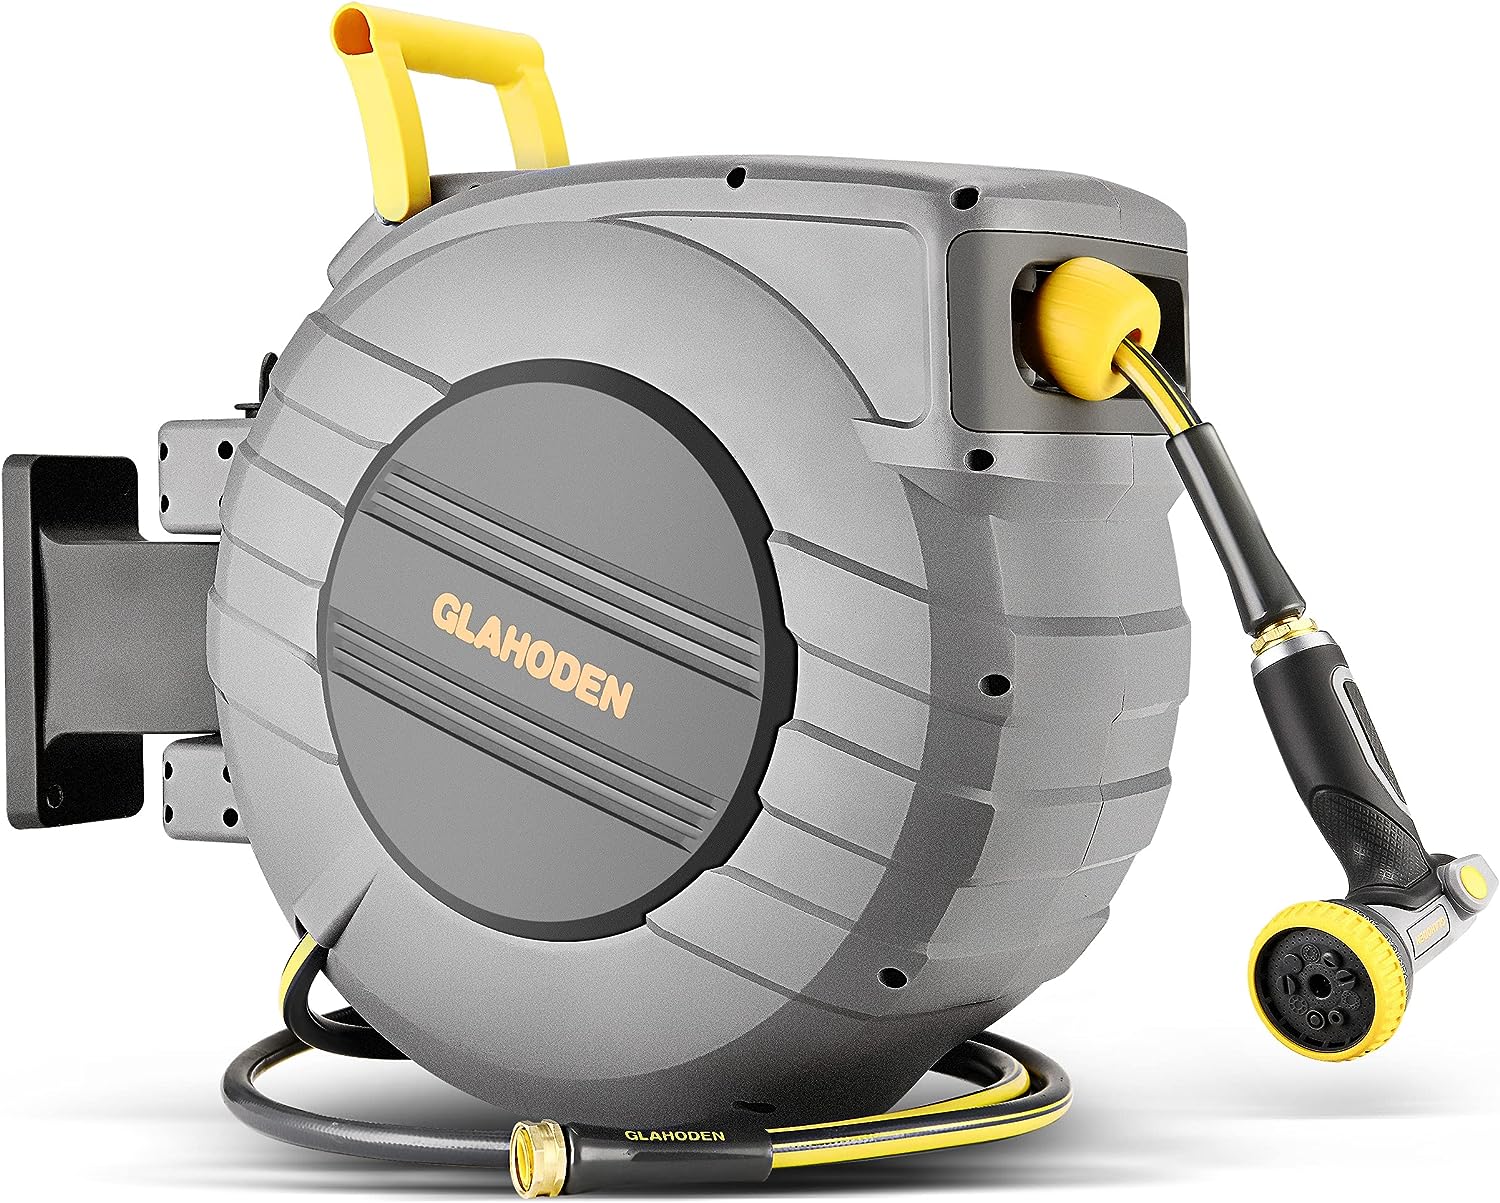 GLAHODEN Retractable Garden Hose Reel, 5/8in x 100ft+6ft 2 Year Anti-fading  Water